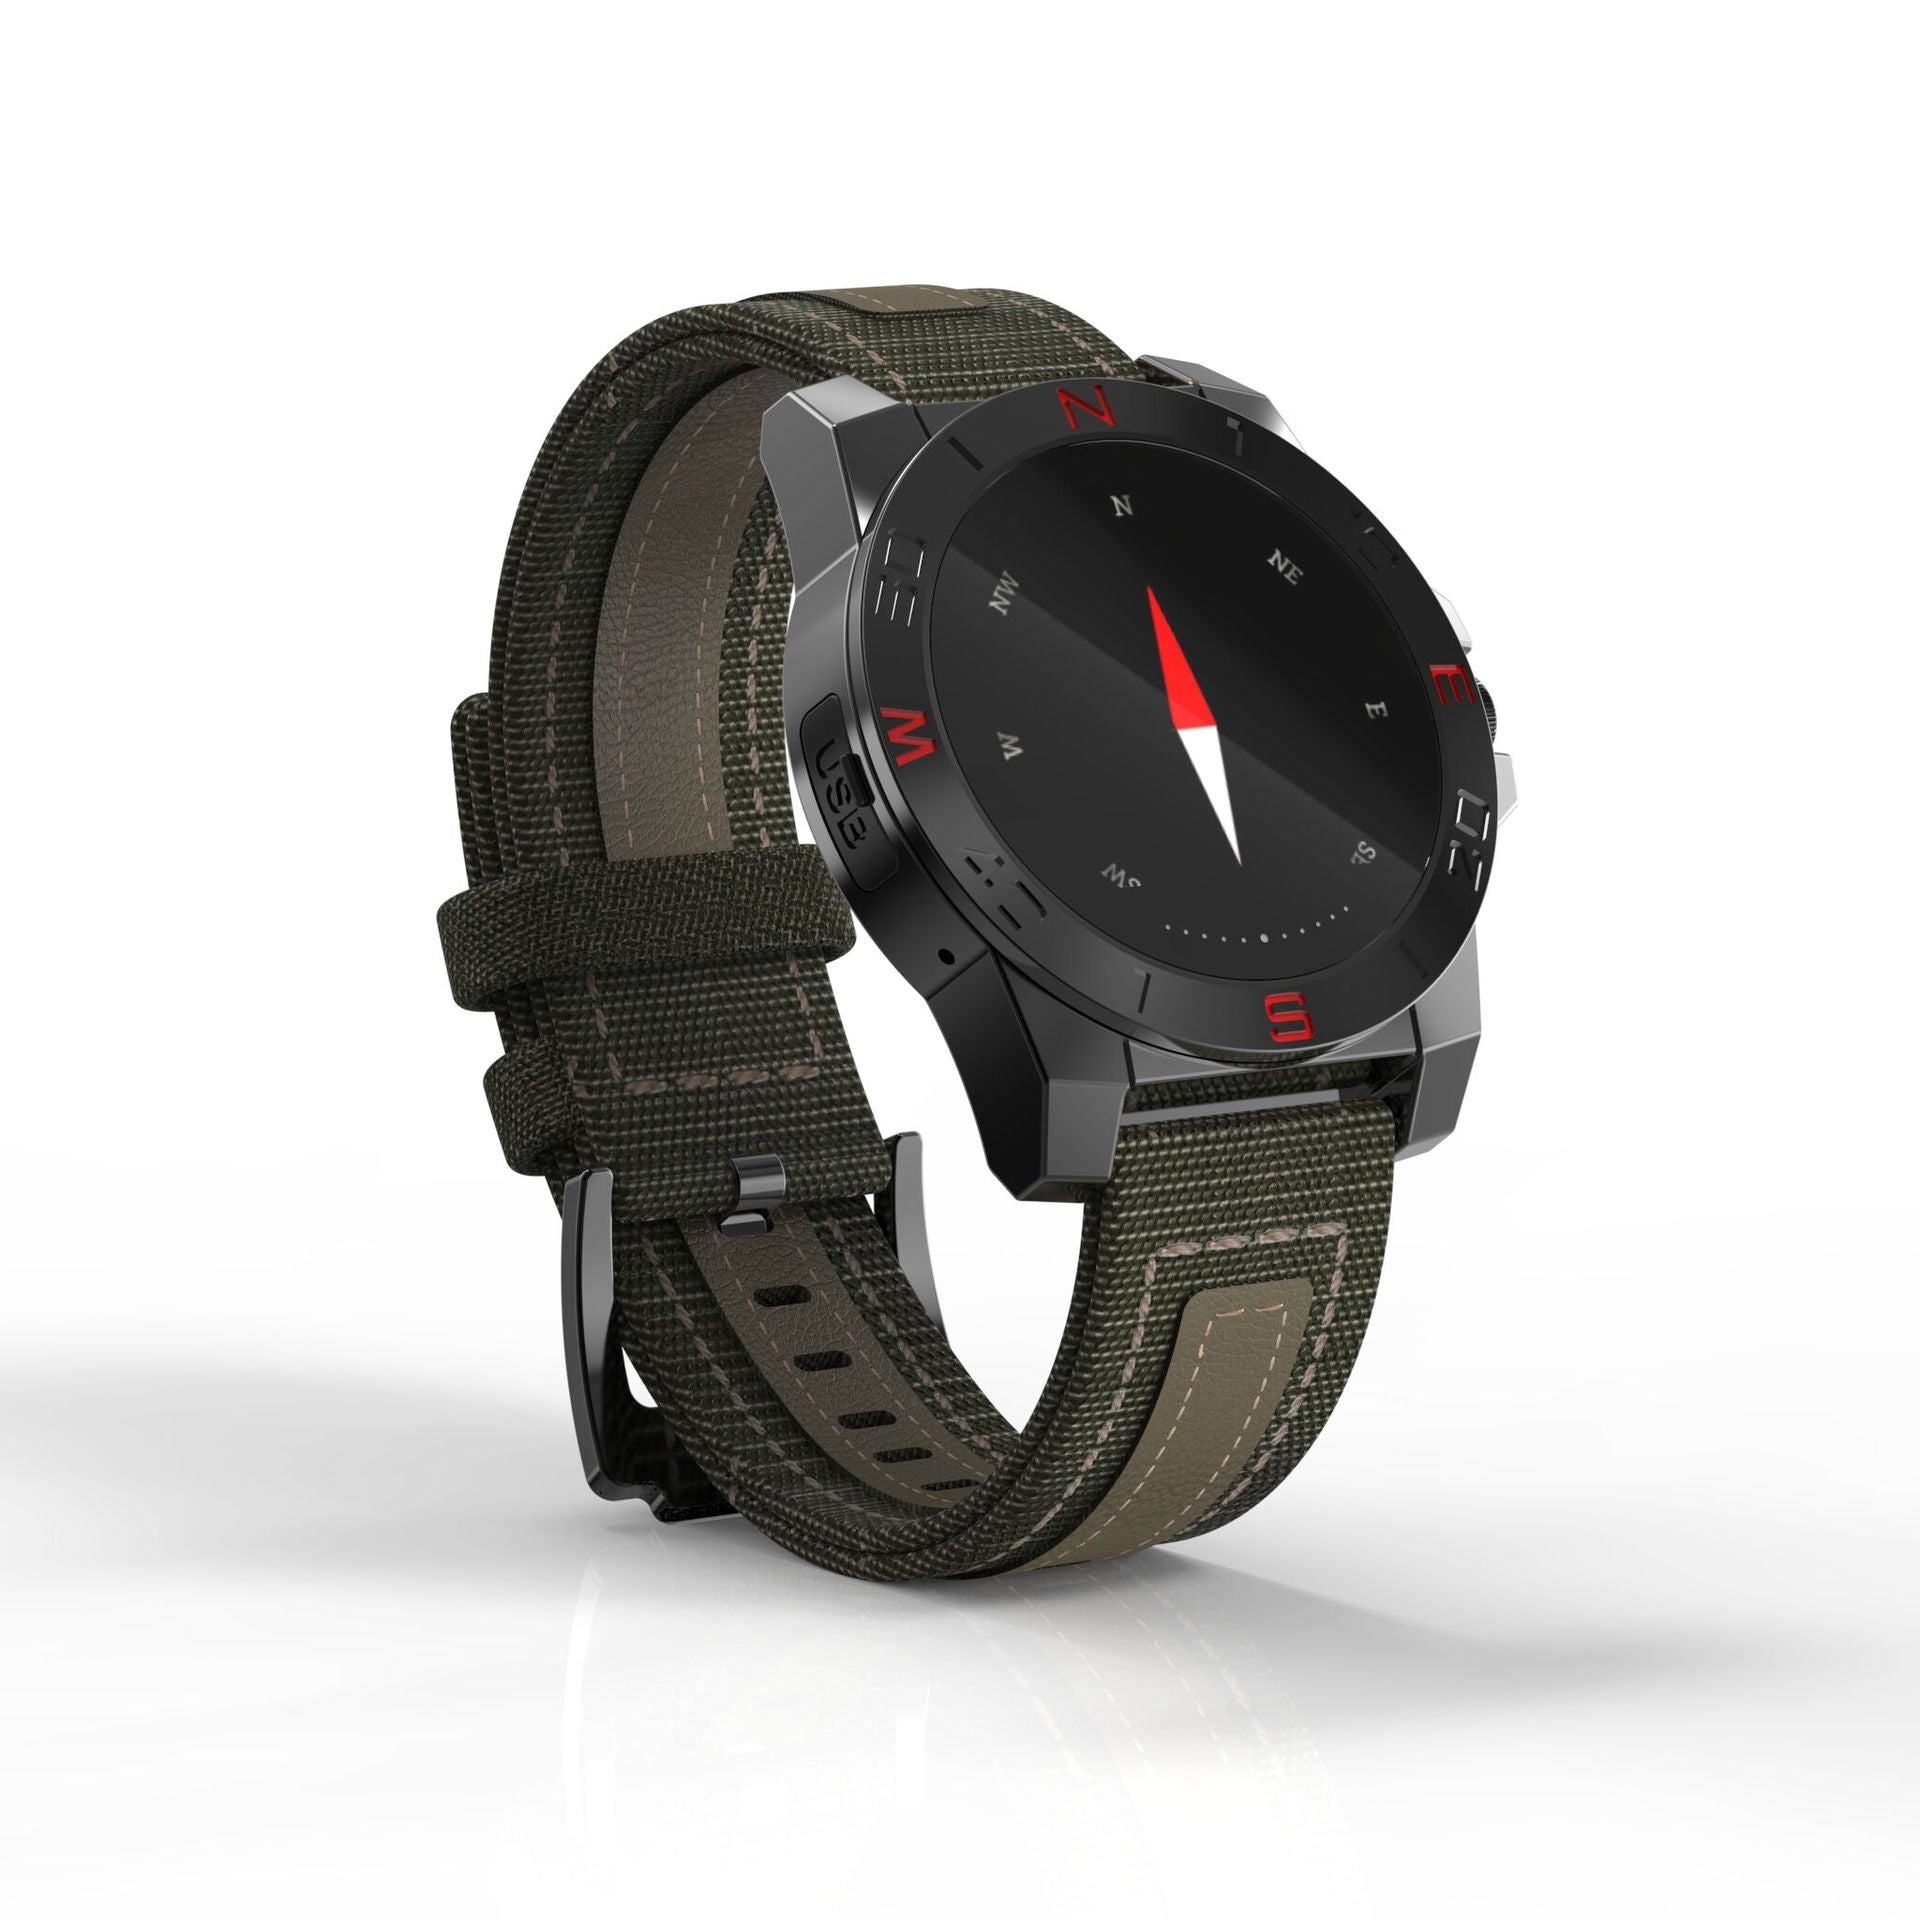 The Multifunctional bright screen smart watch